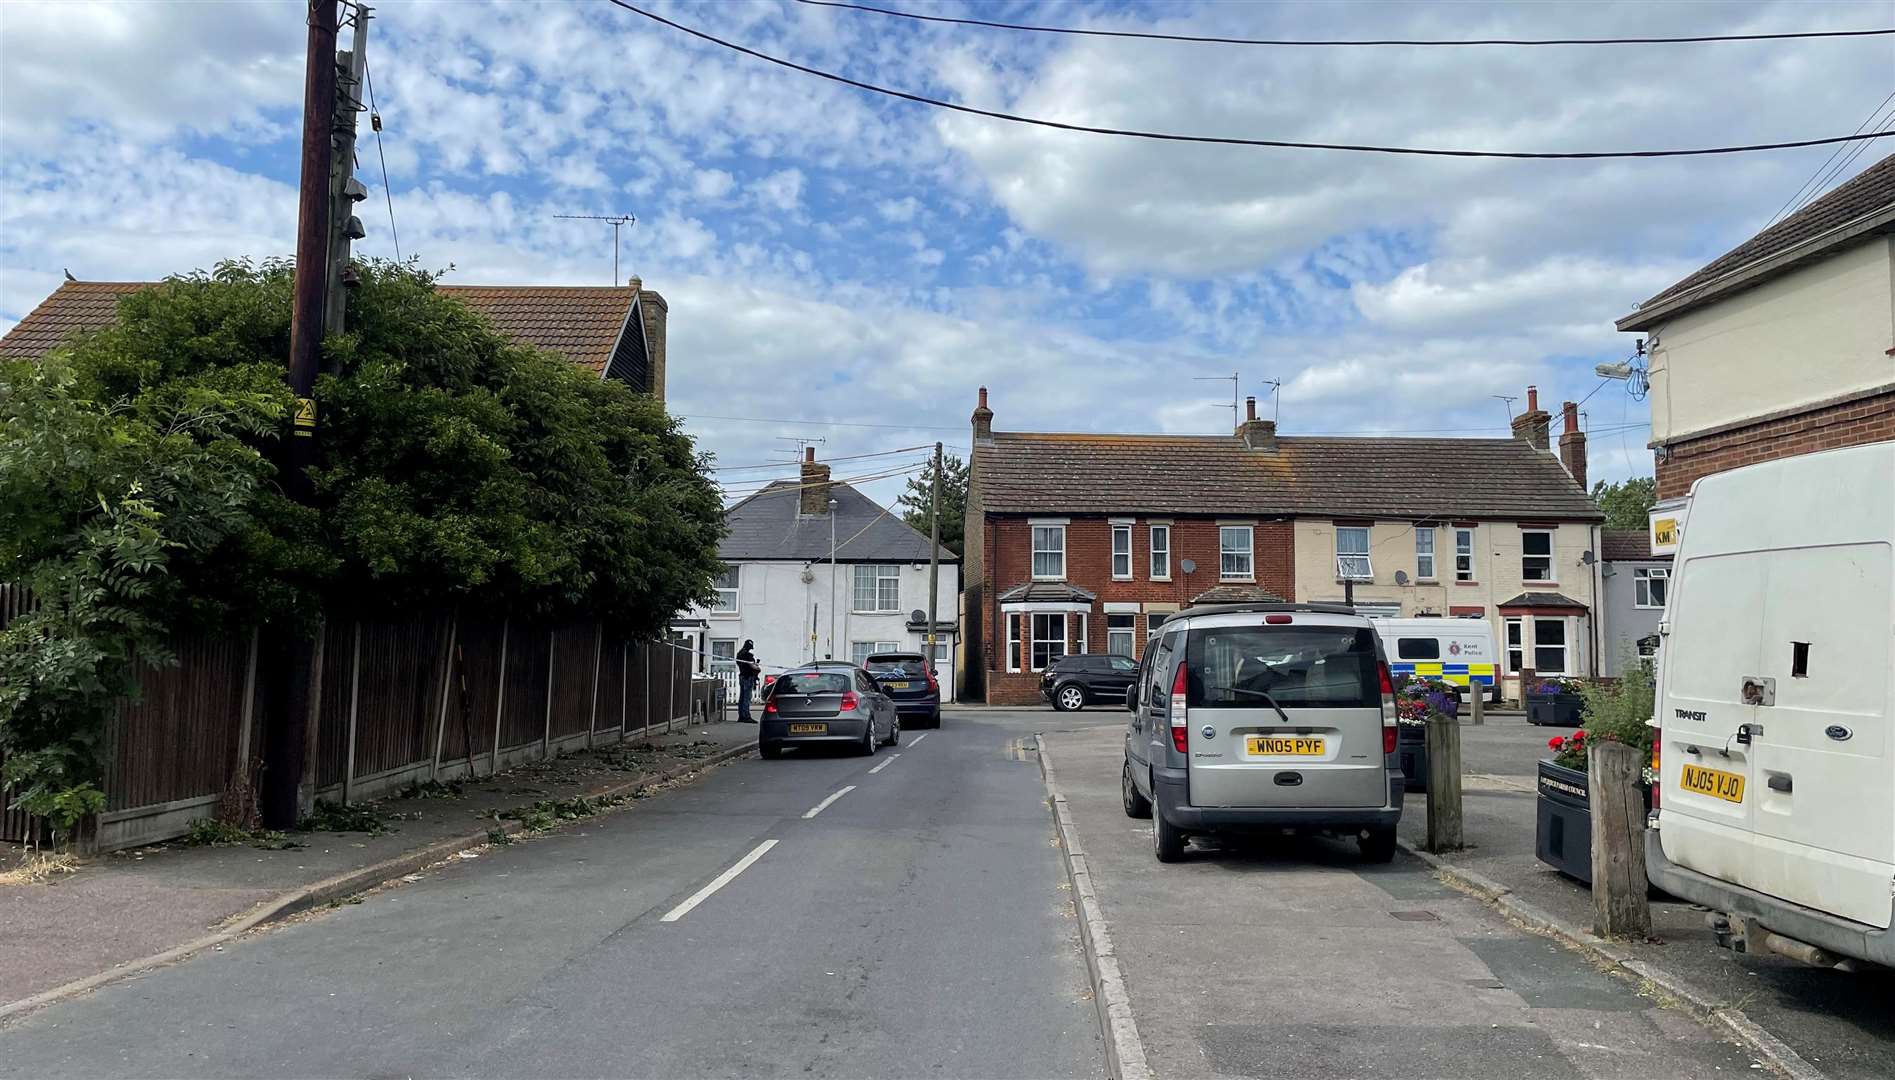 Armed police descended on Eastchurch High Street, Sheppey, this afternoon